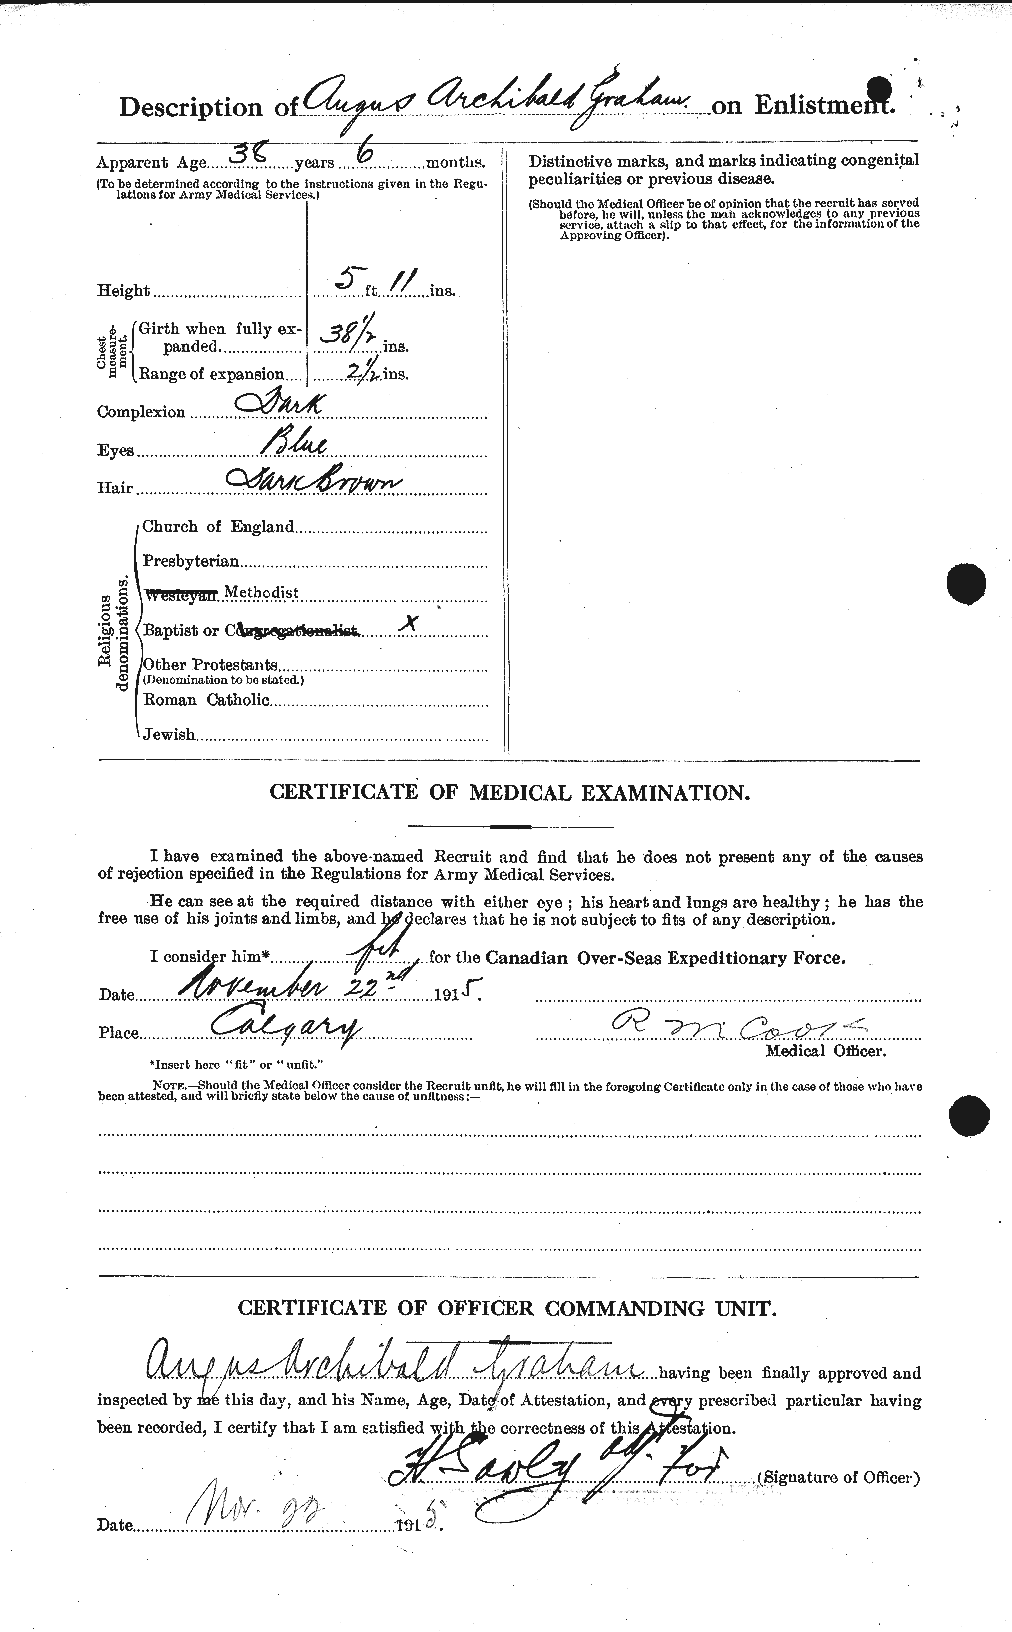 Personnel Records of the First World War - CEF 359624b